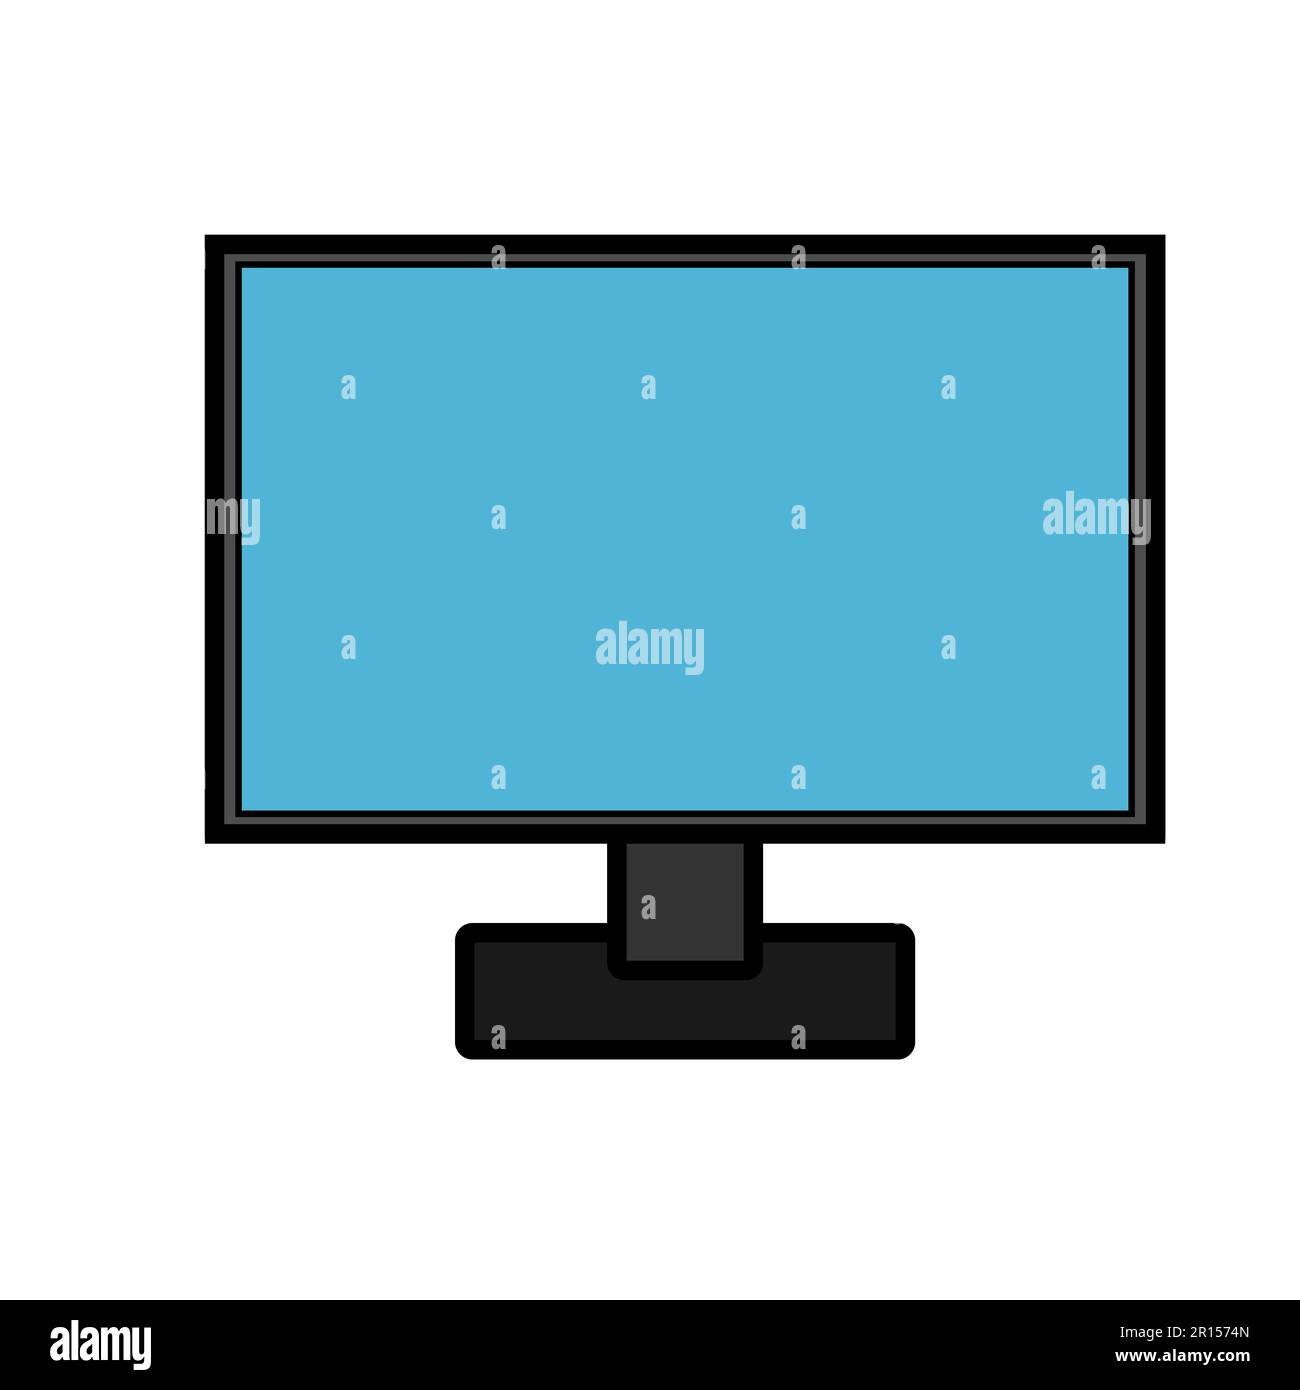 Vector illustration icon of a modern digital digital smart rectangular computer with monitor, laptop isolated on white background. Concept: computer d Stock Vector